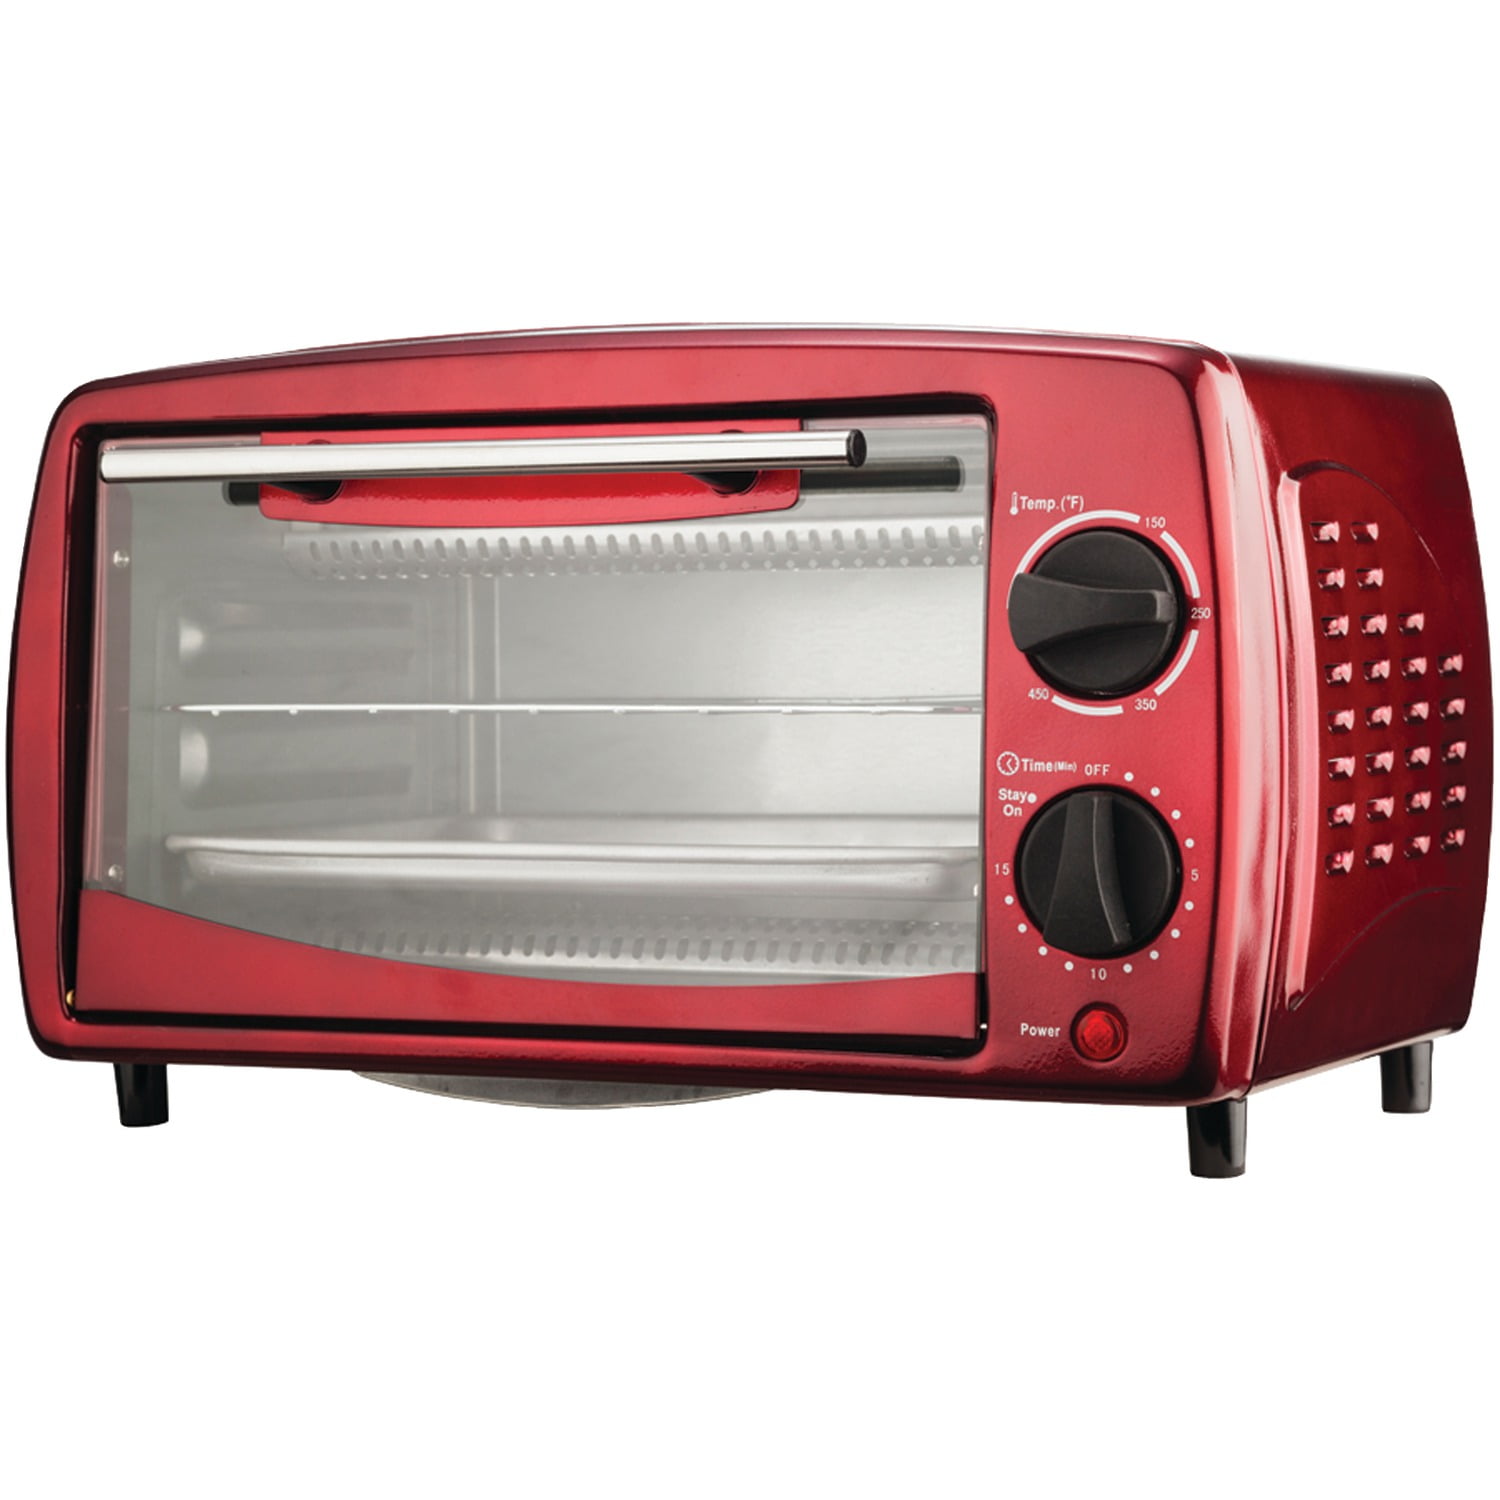 Brentwood Appliances TS-345R 4-Slice Toaster Oven, Red